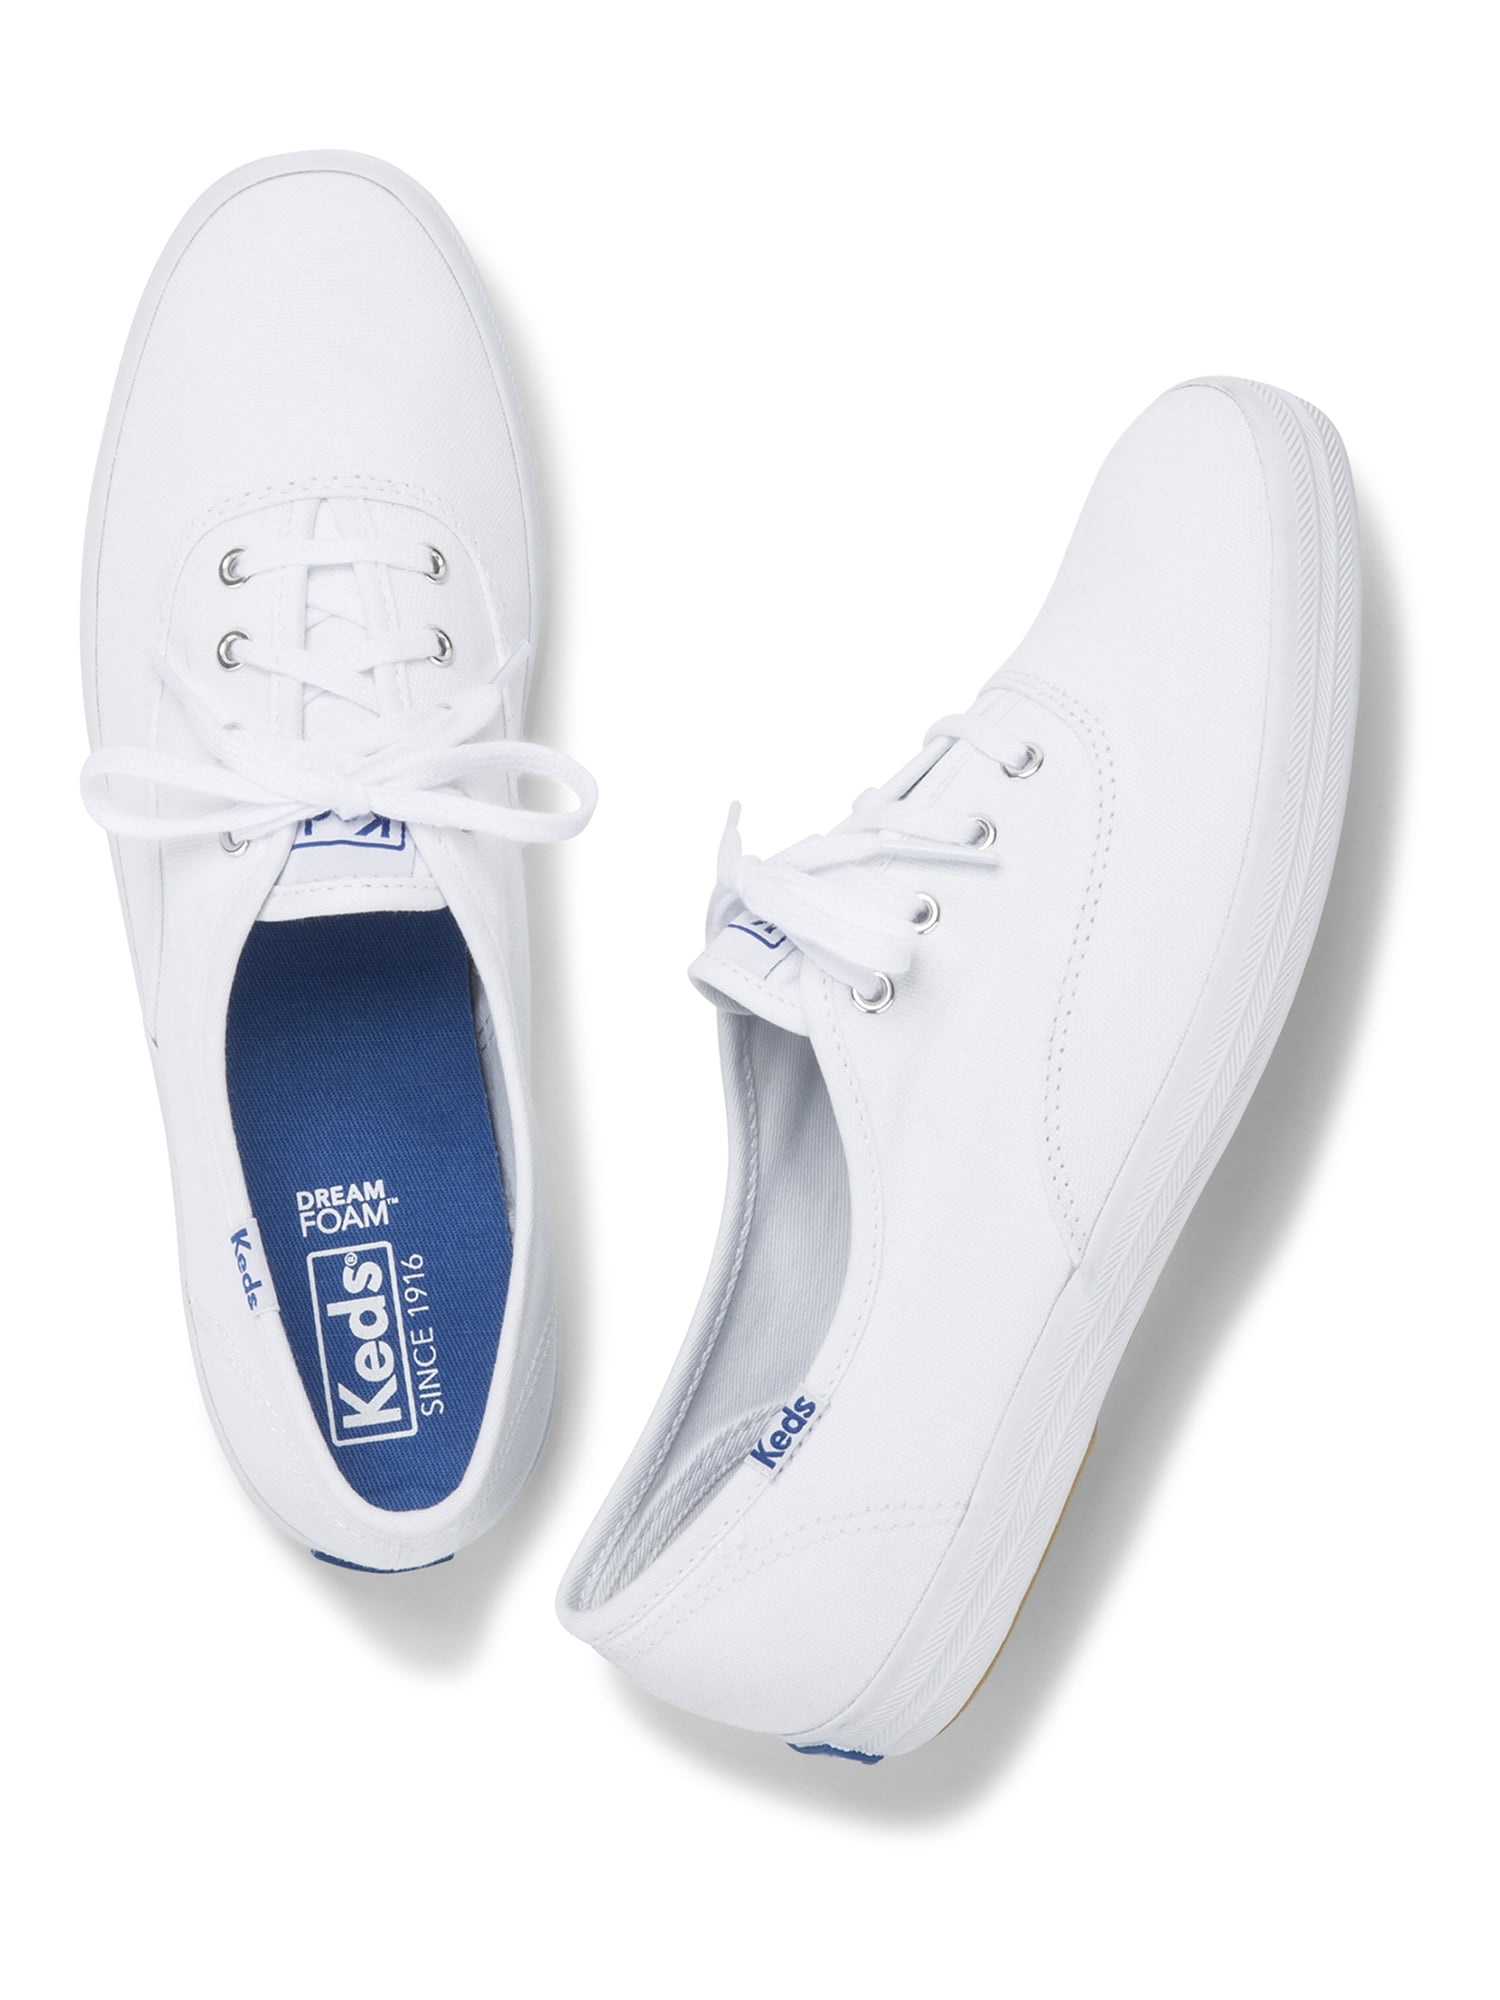 what stores carry keds